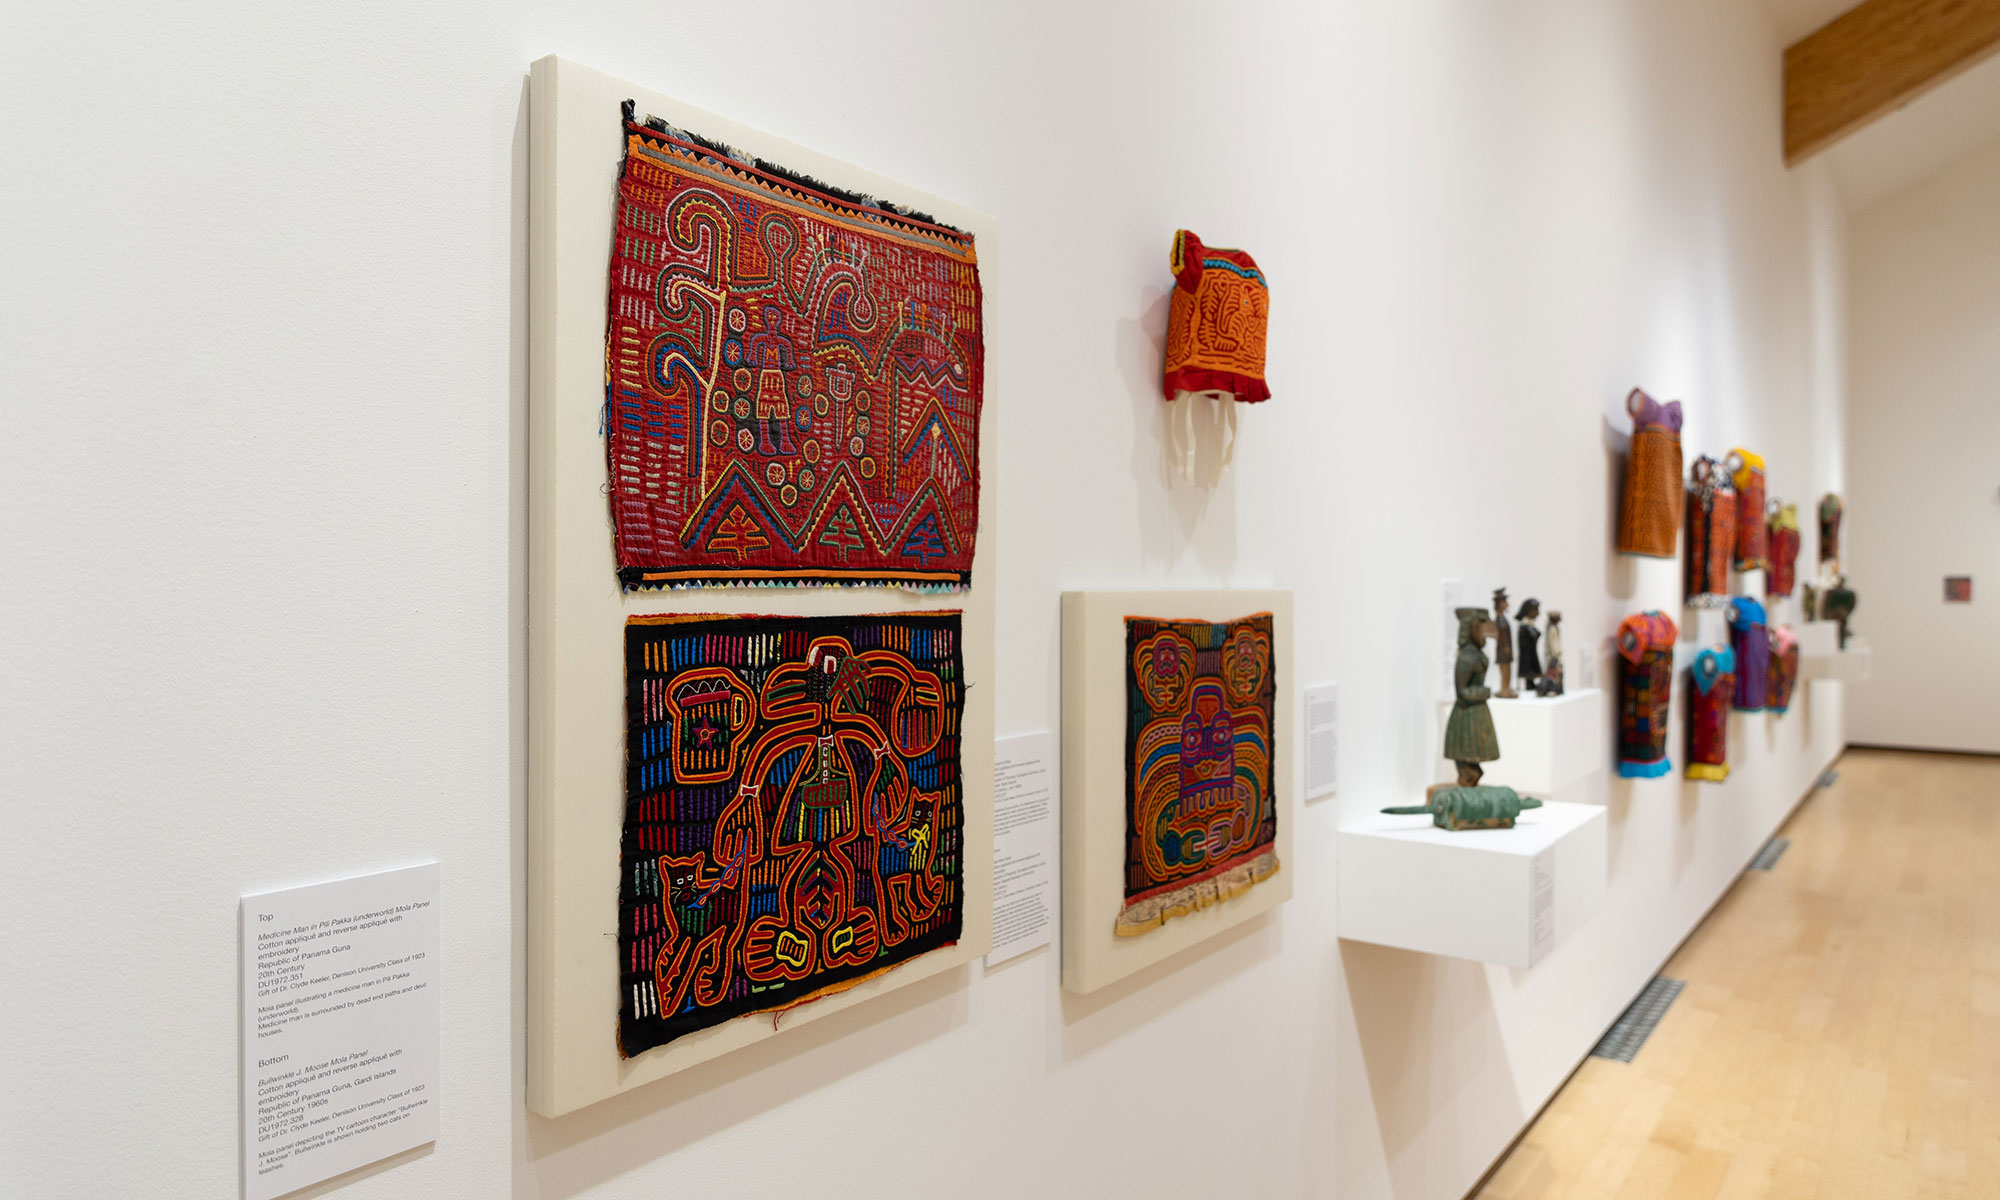 Around the World and back again: the making of Denison’s Art Collection